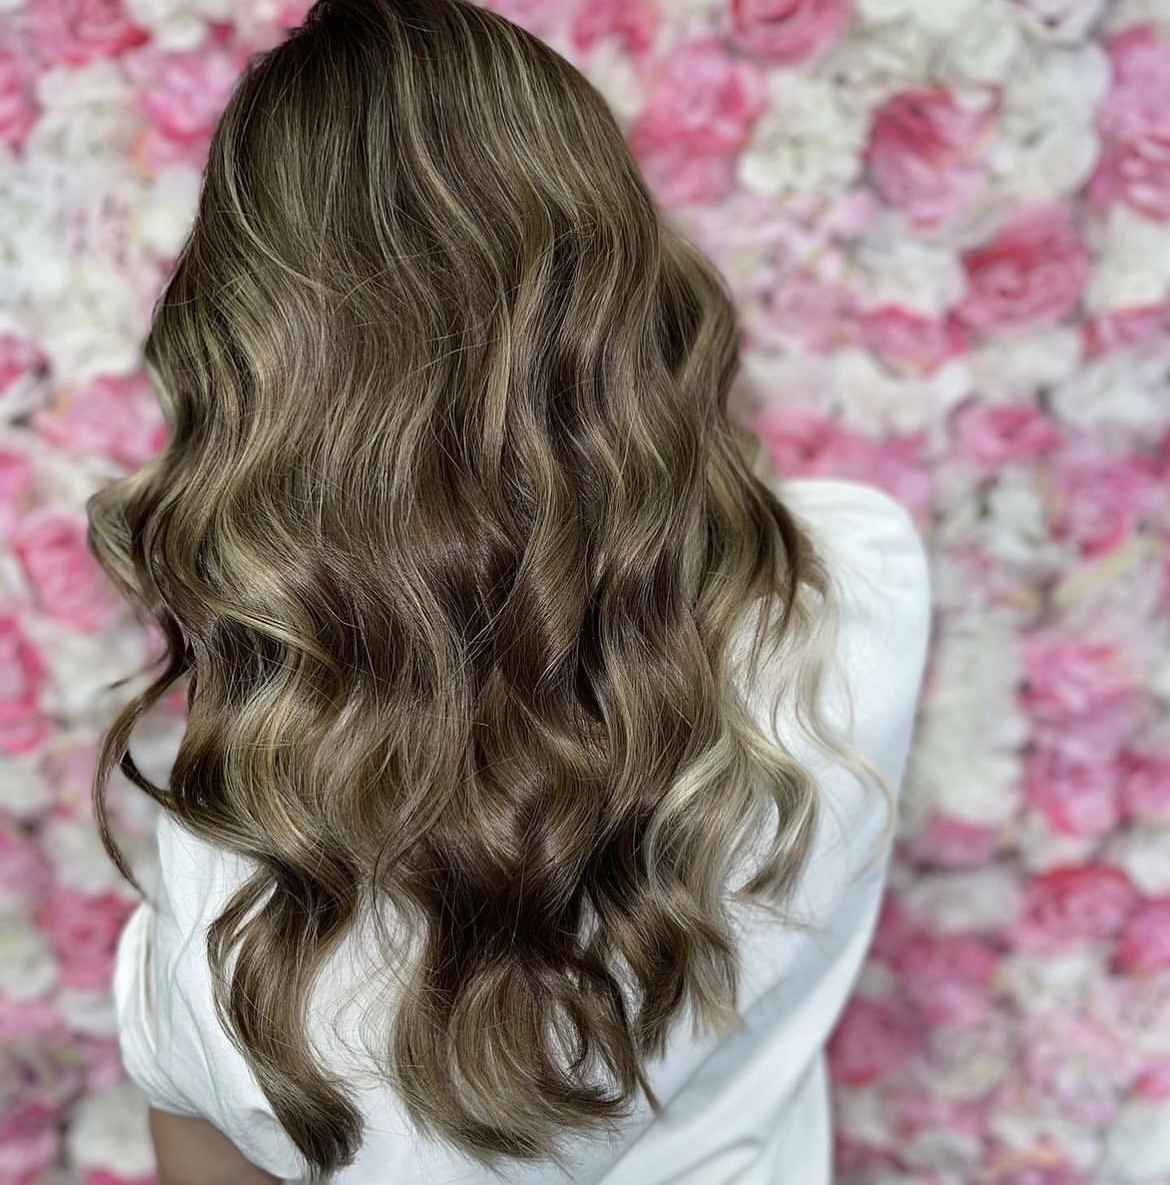 We are obsessed with this stunning milk tea balayage🧋

If you'd like your hair to look like this, get in touch with the team at Belle Blush Salon today!

#peterborough #rivergatesc #haircare #hairtip #hairdresser #belleblushsalon #hairinspo #hairtips #balayage